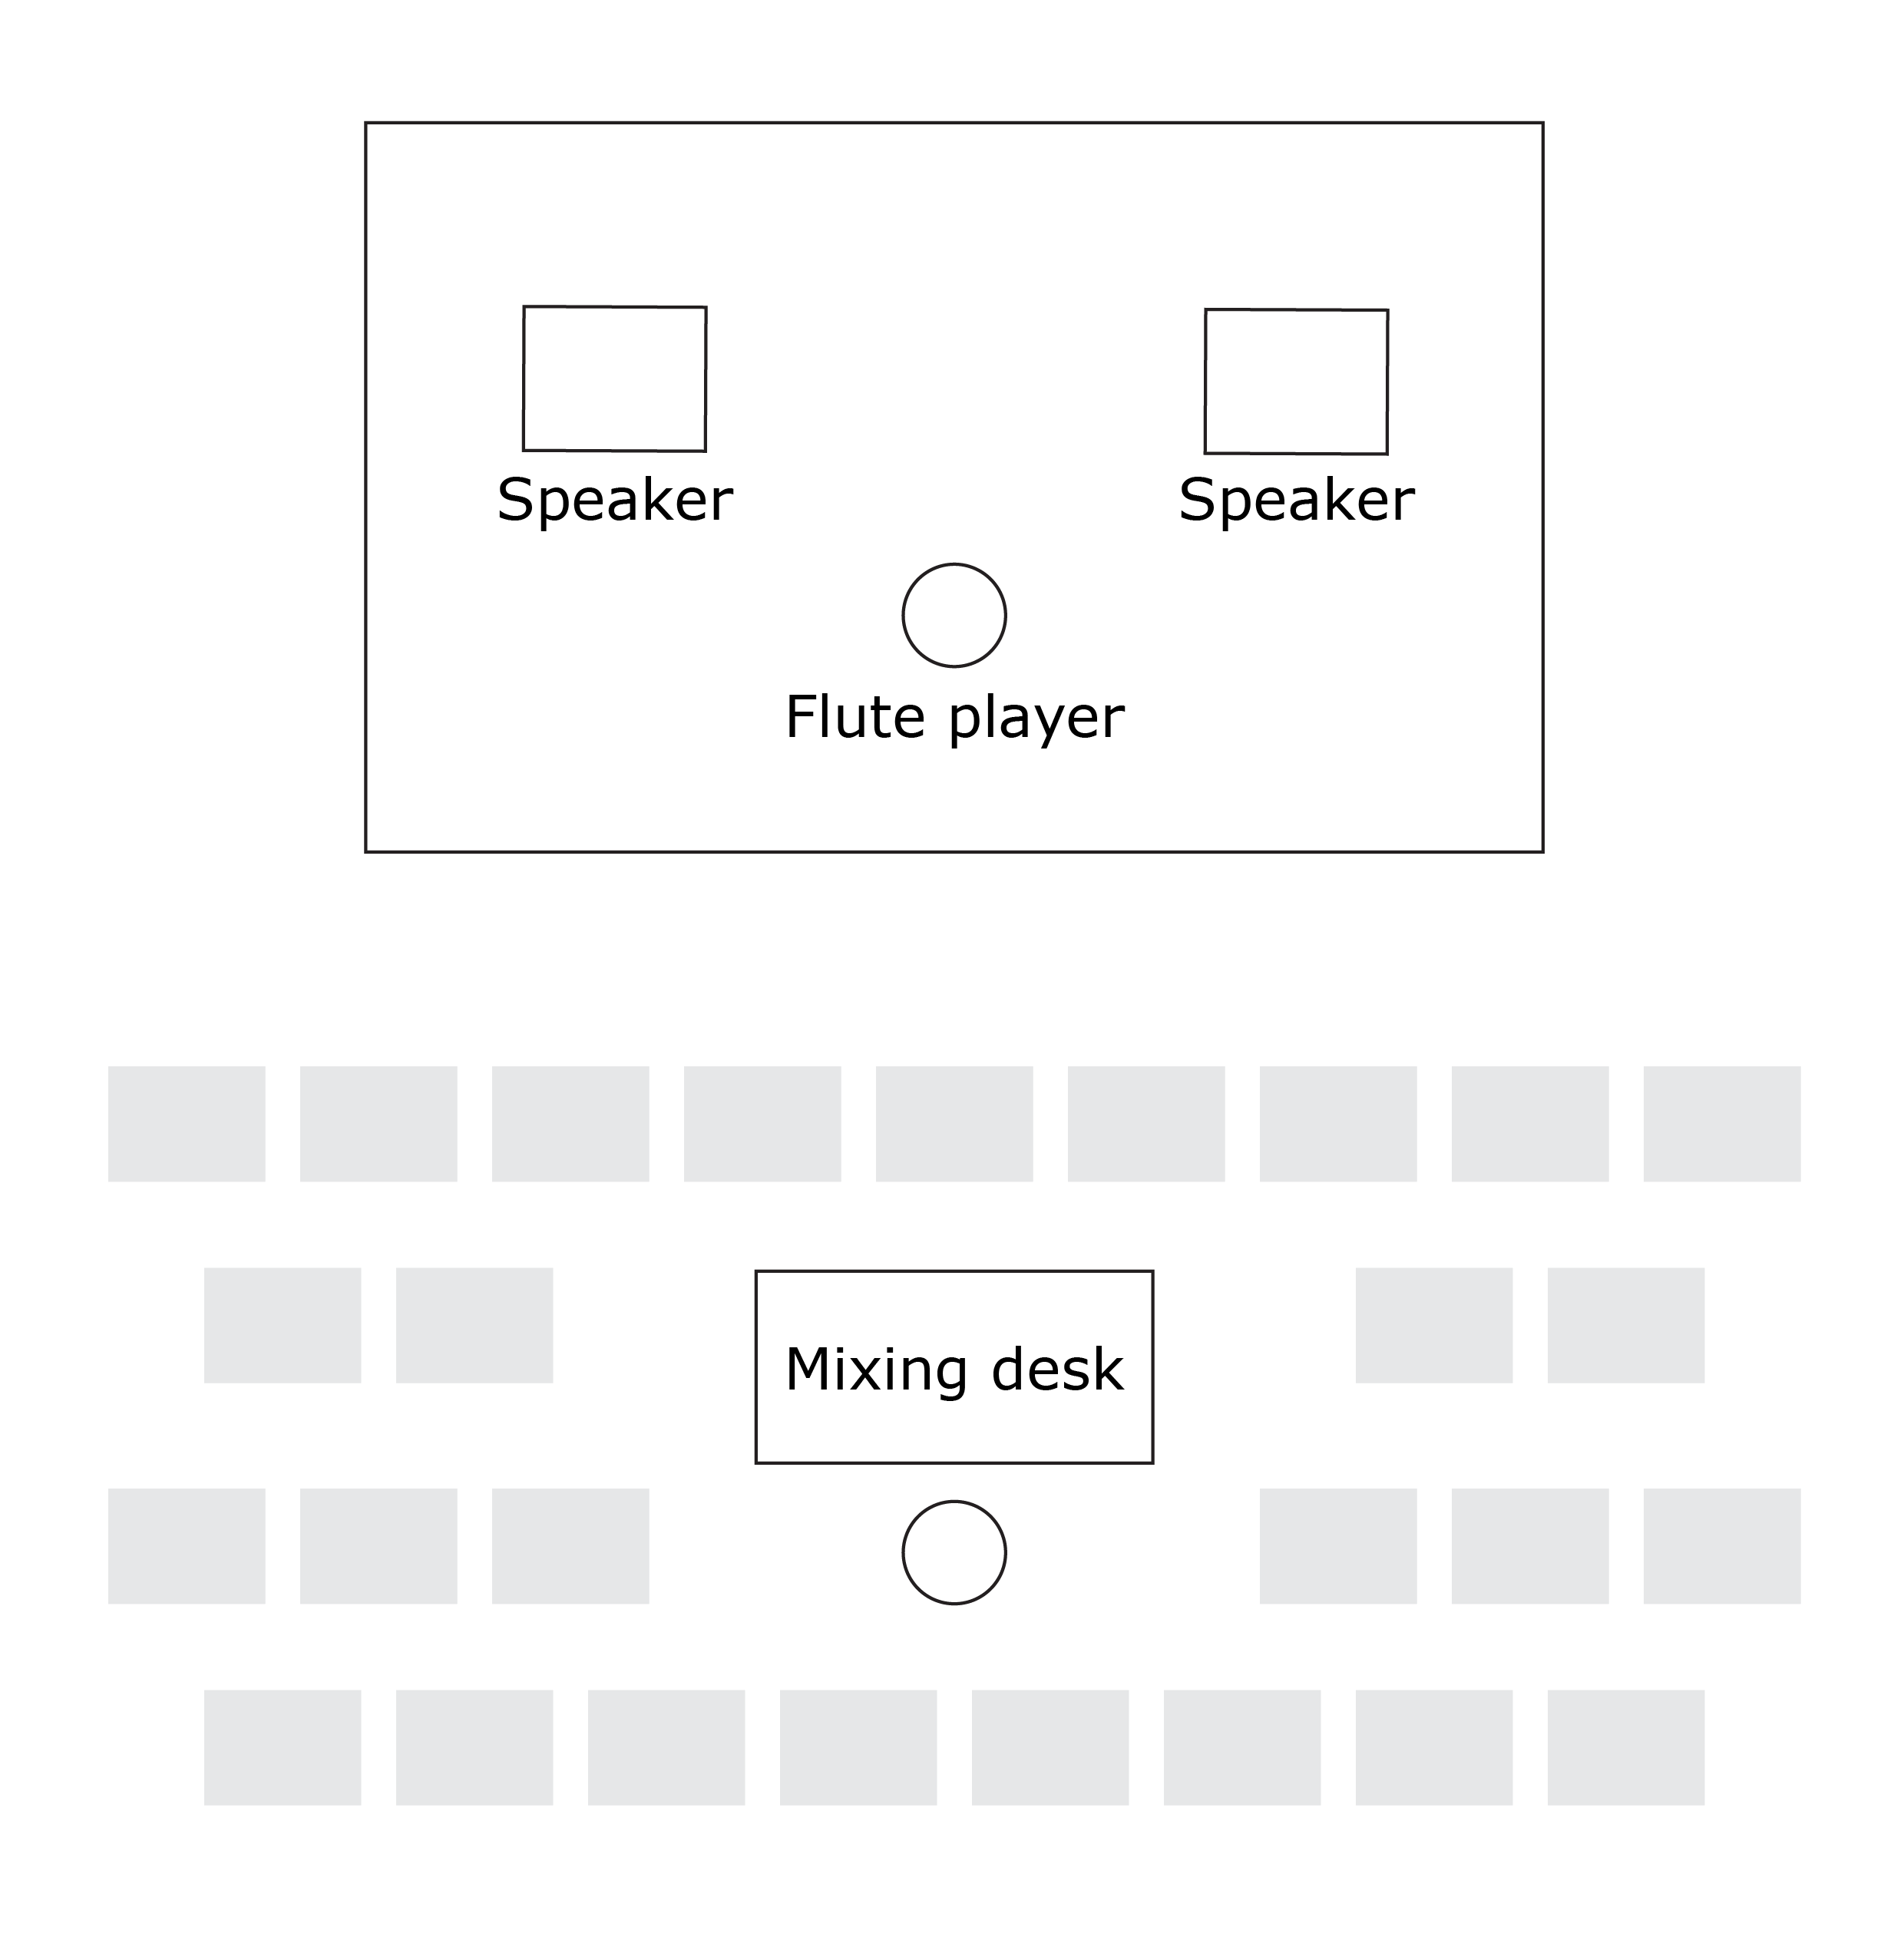 Typical performance stage plan